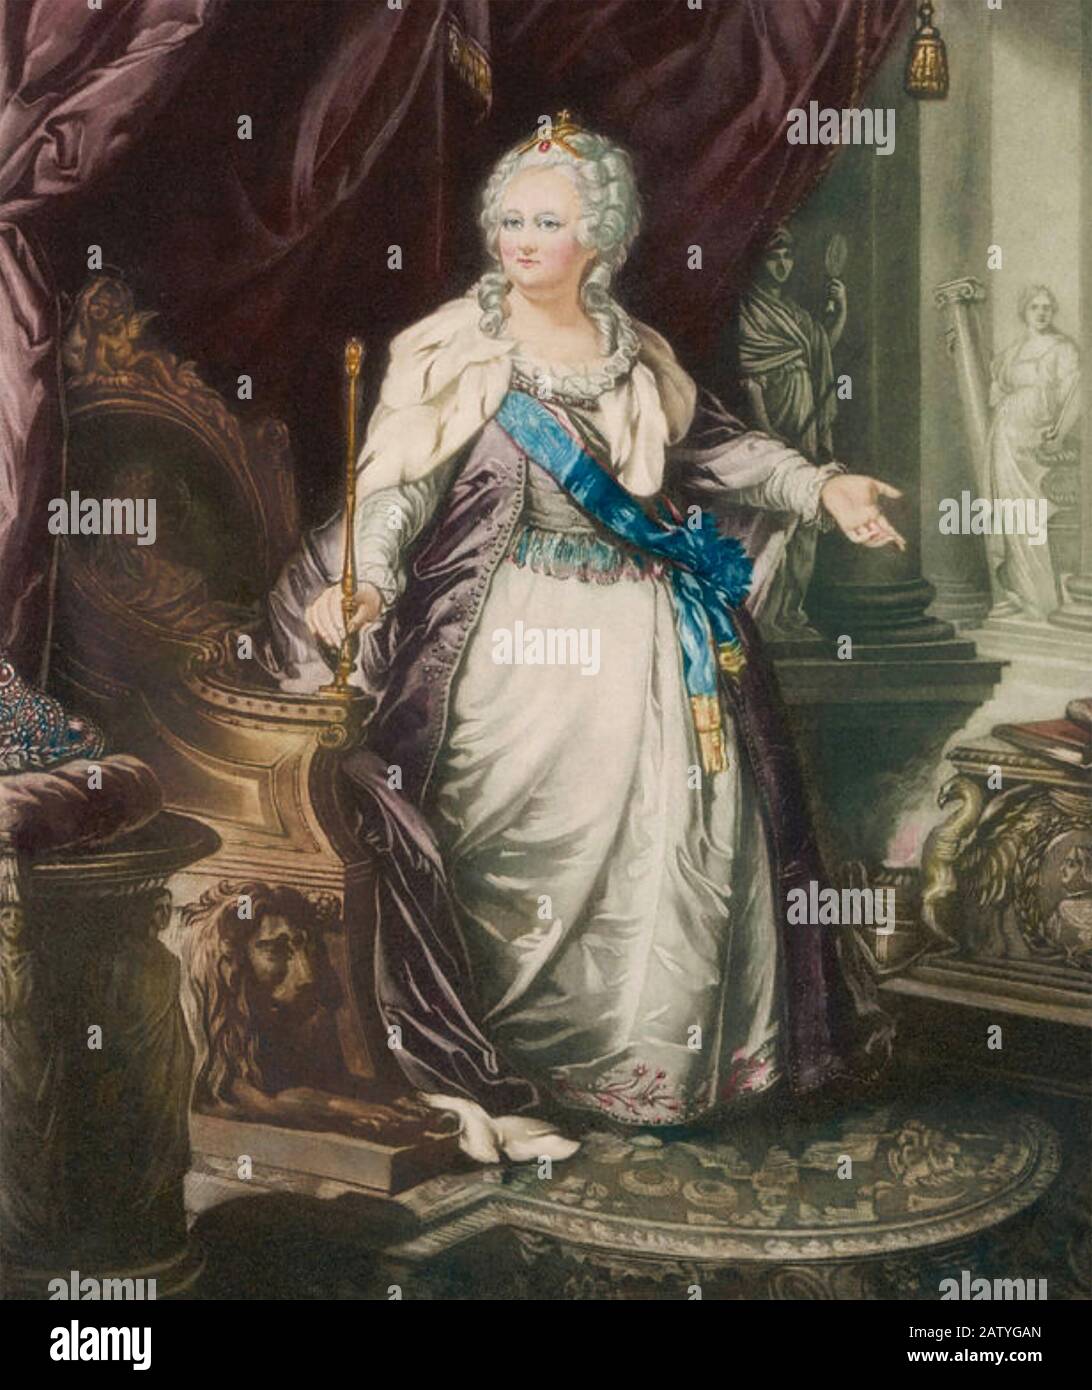 CATHERINE THE GREAT Empress of Russia (1729-1796) Stock Photo